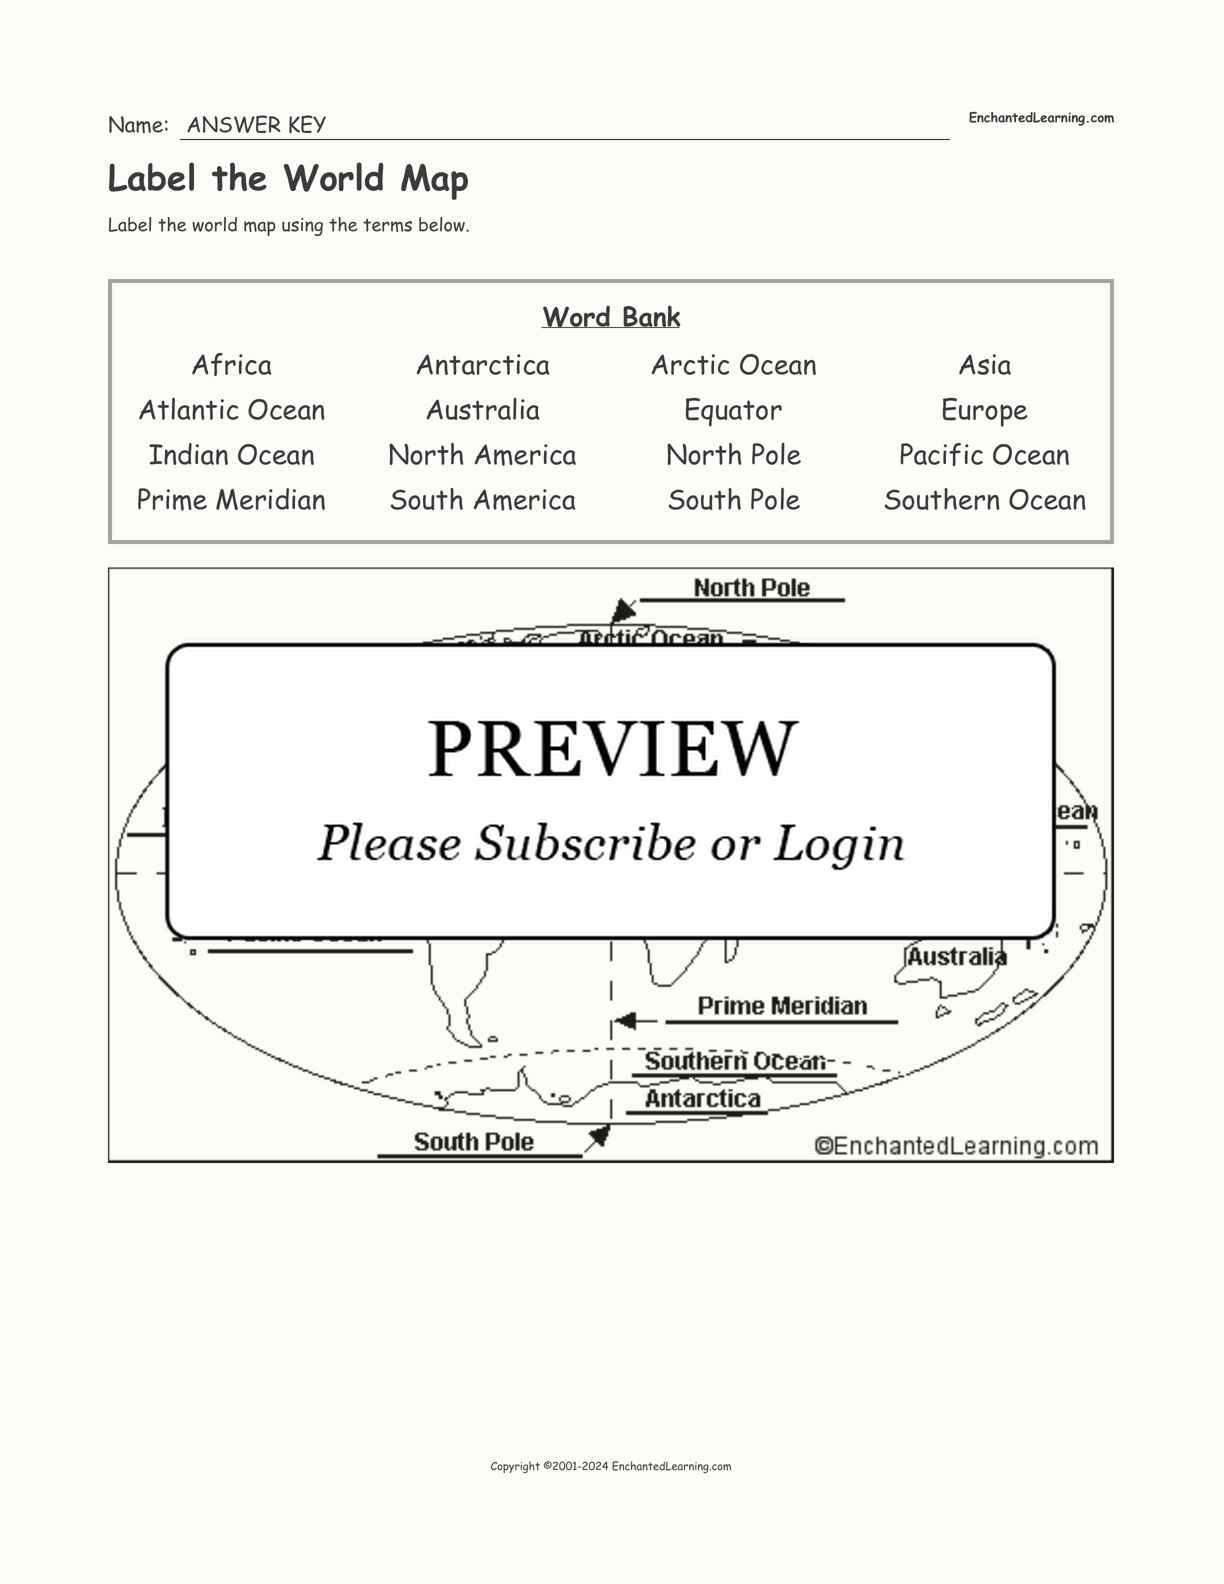 Label the World Map interactive worksheet page 2